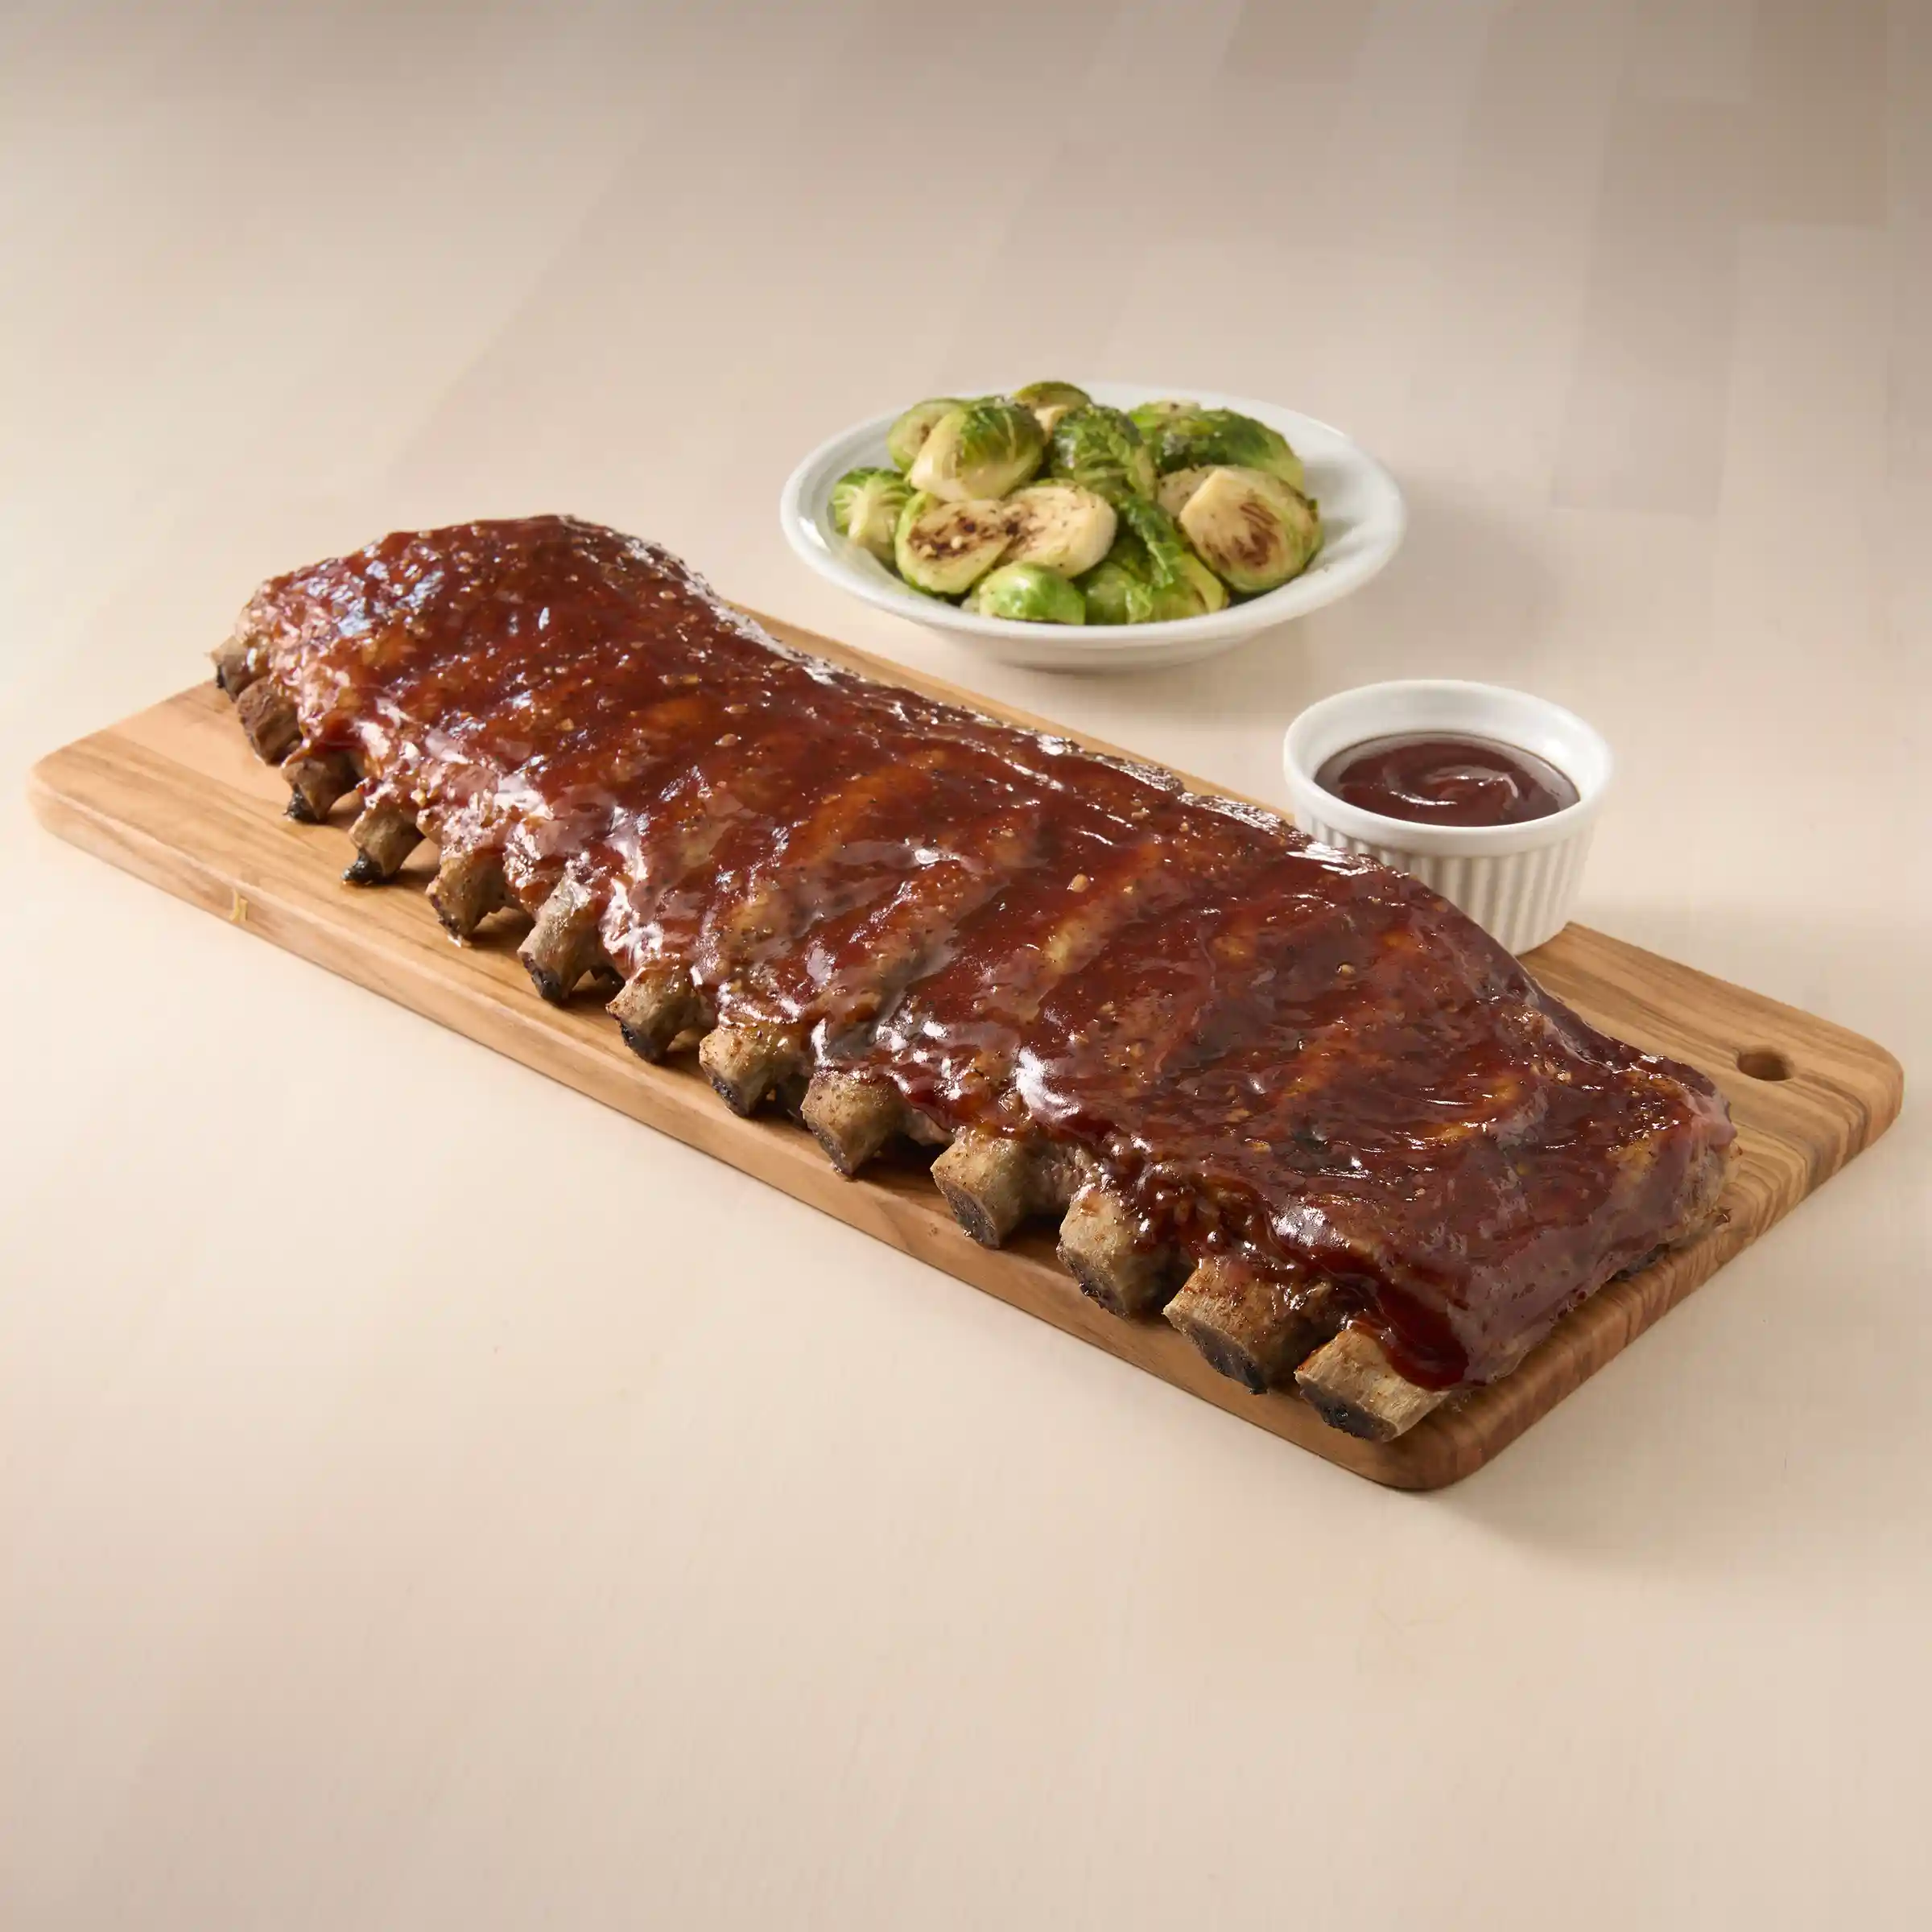 ibp Trusted Excellence® Brand St. Louis Style Ribs, 2.75 - 3.1 lbshttps://images.salsify.com/image/upload/s---wJ0GHe3--/q_25/ma0kwvzemvvyncsgdrmu.webp